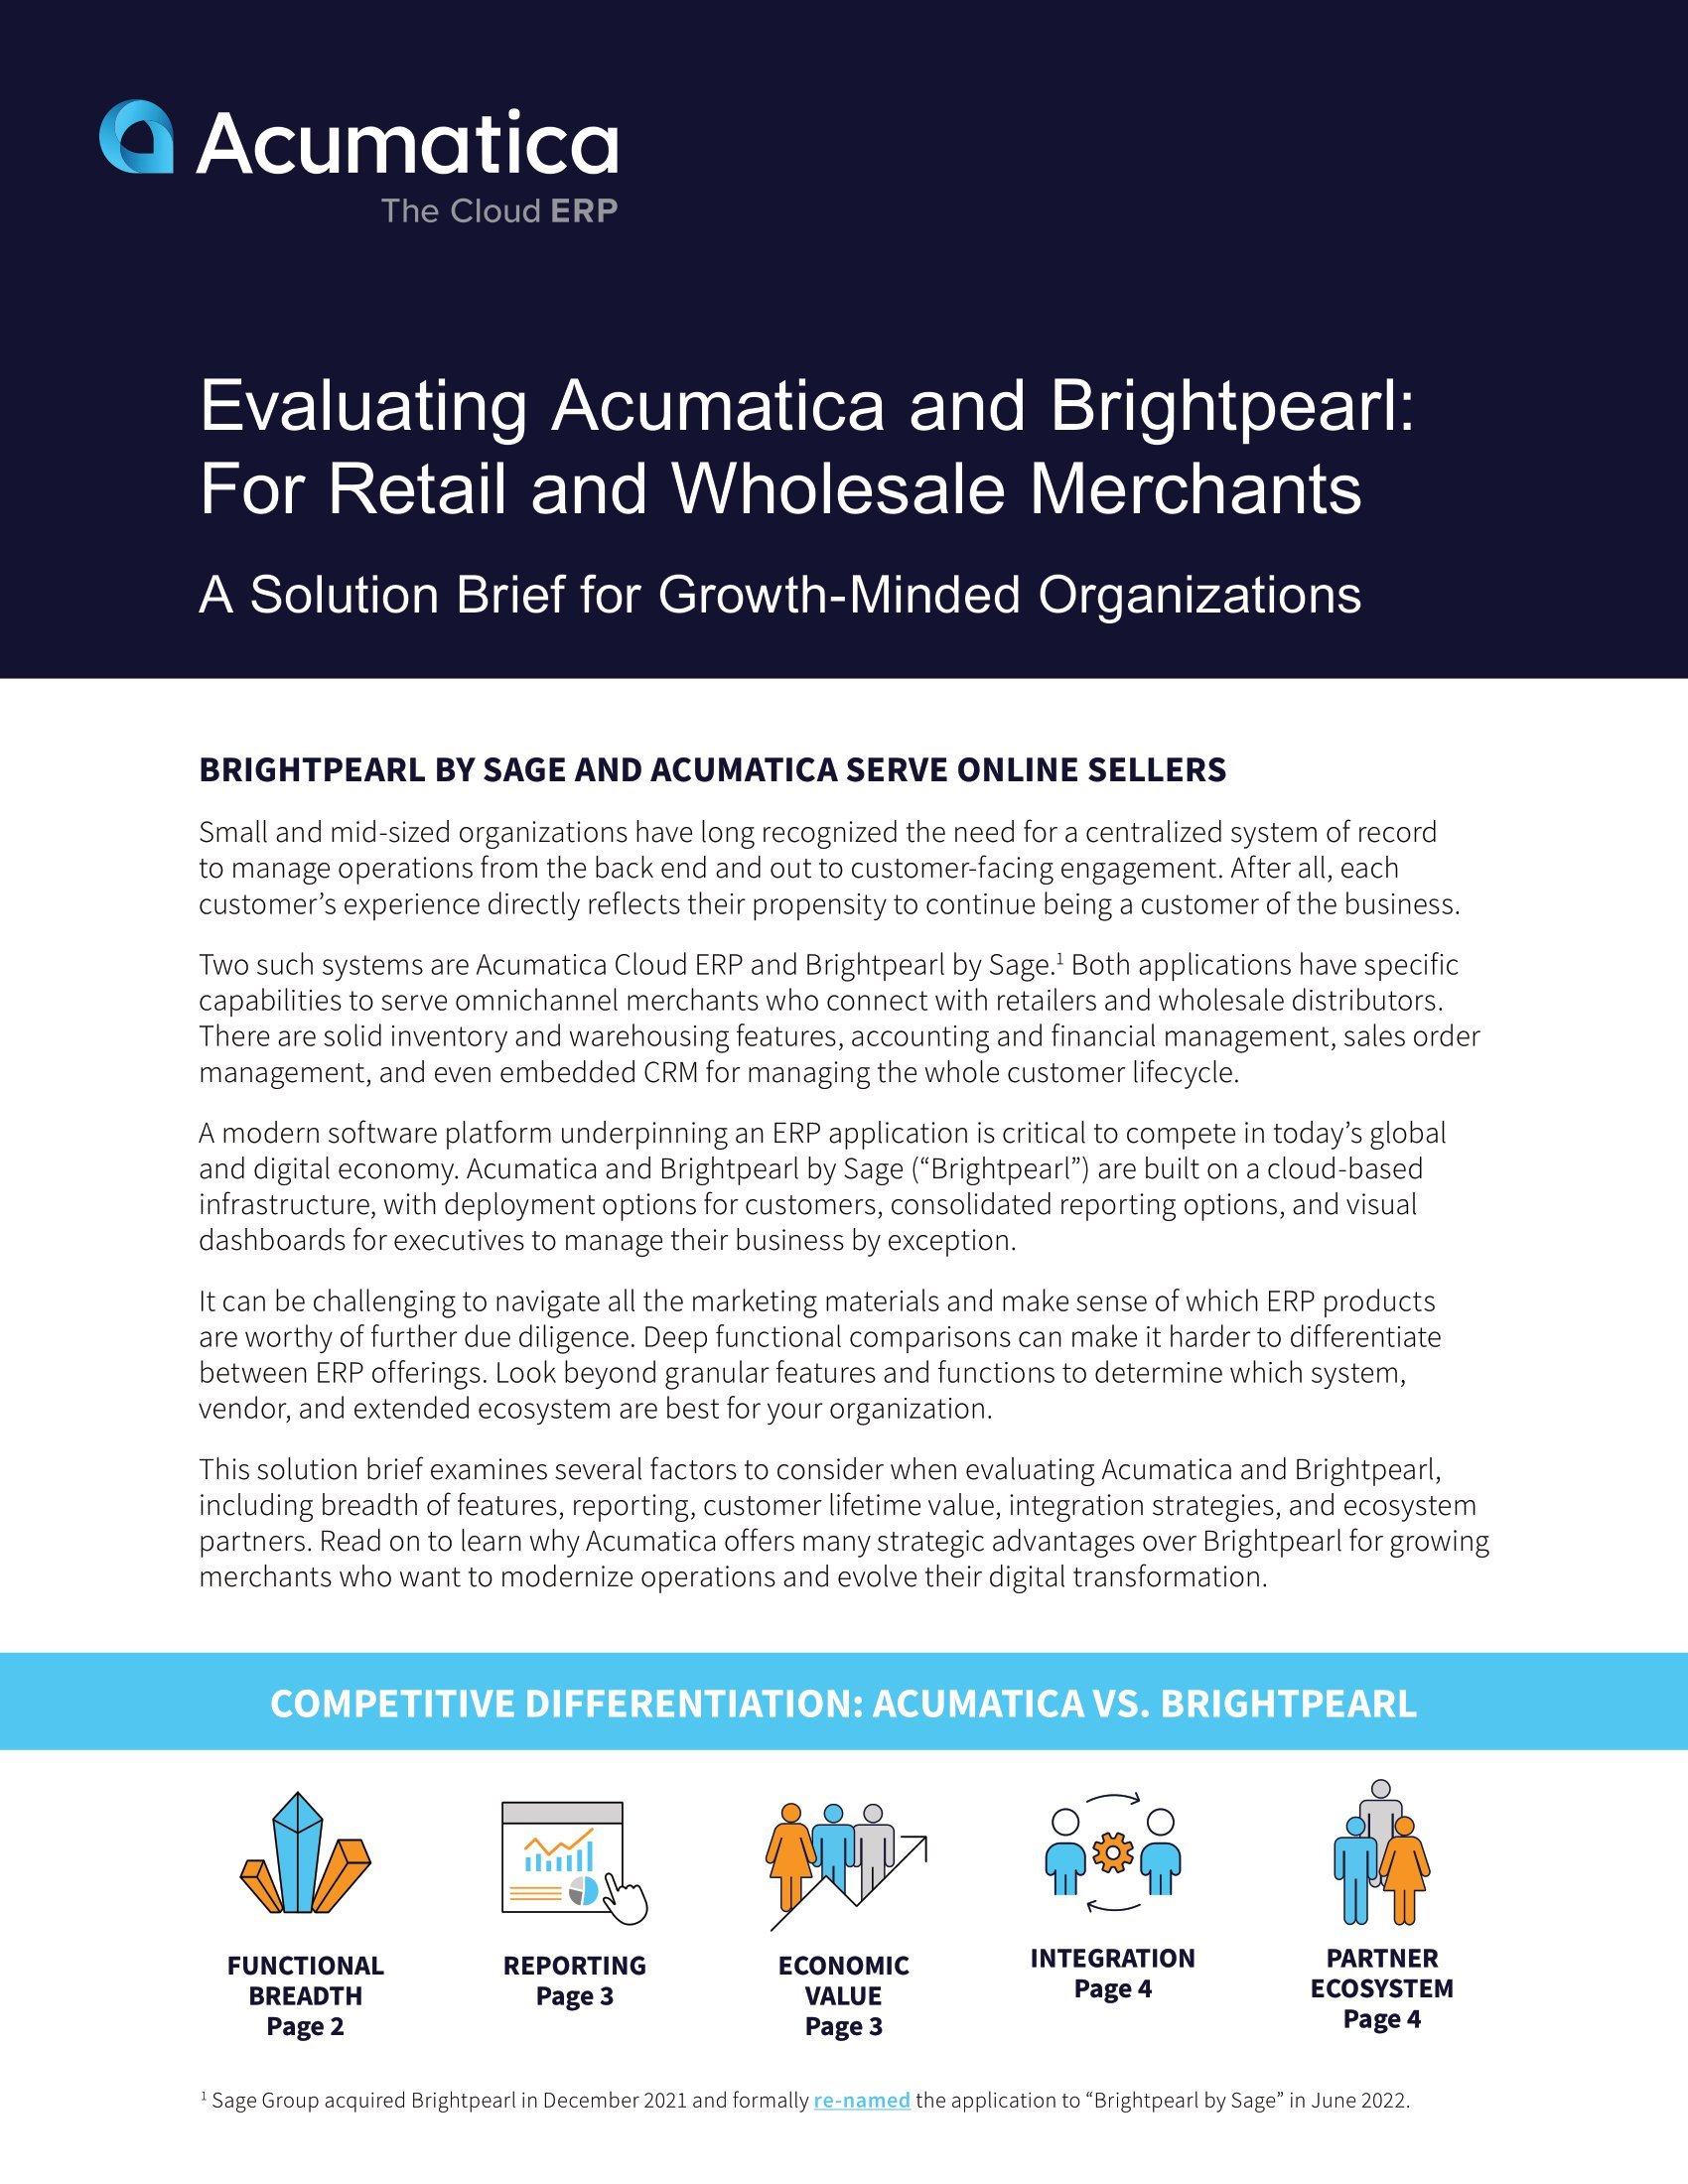 Fact-Driven Comparison of Acumatica and Brightpearl For Retail and Wholesale Merchants